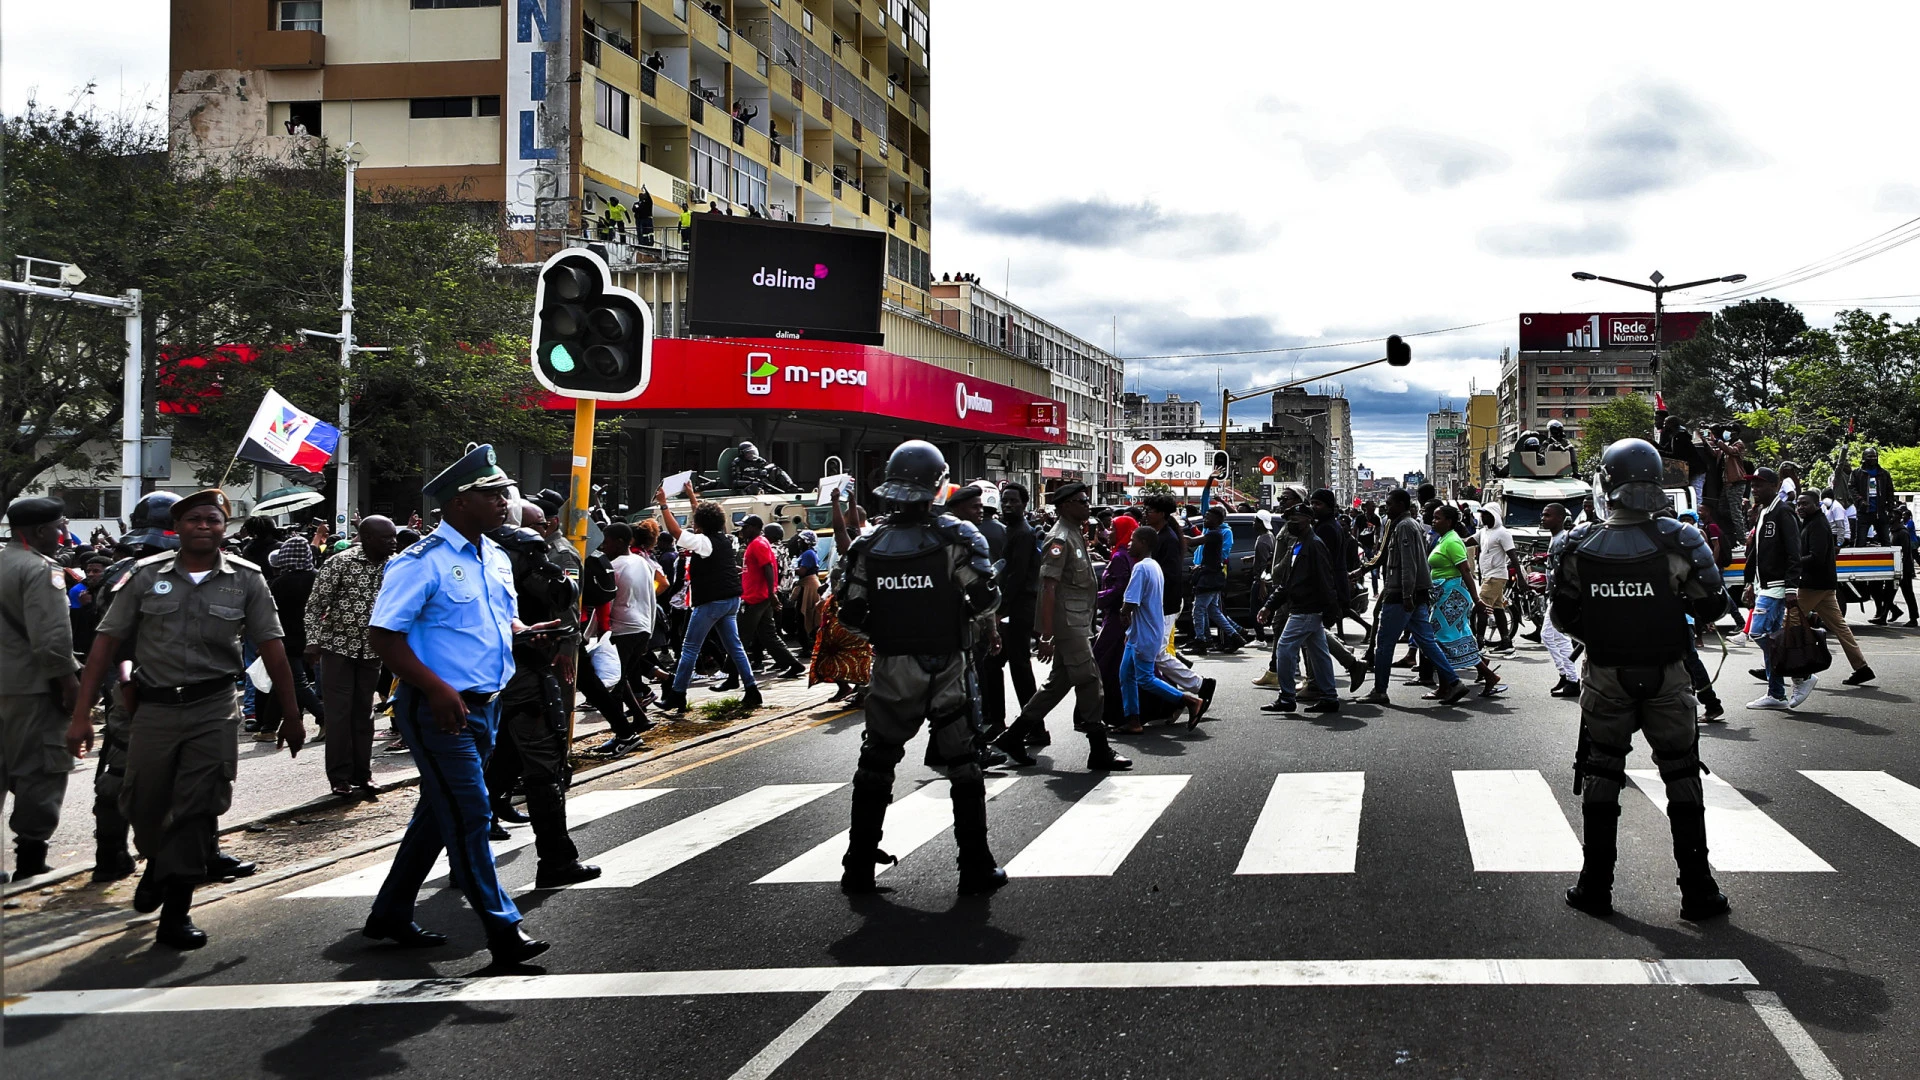 Protests Over Mozambique Election Lead to 70 Arrests, 10 Injuries. (Photo Internet reproduction)